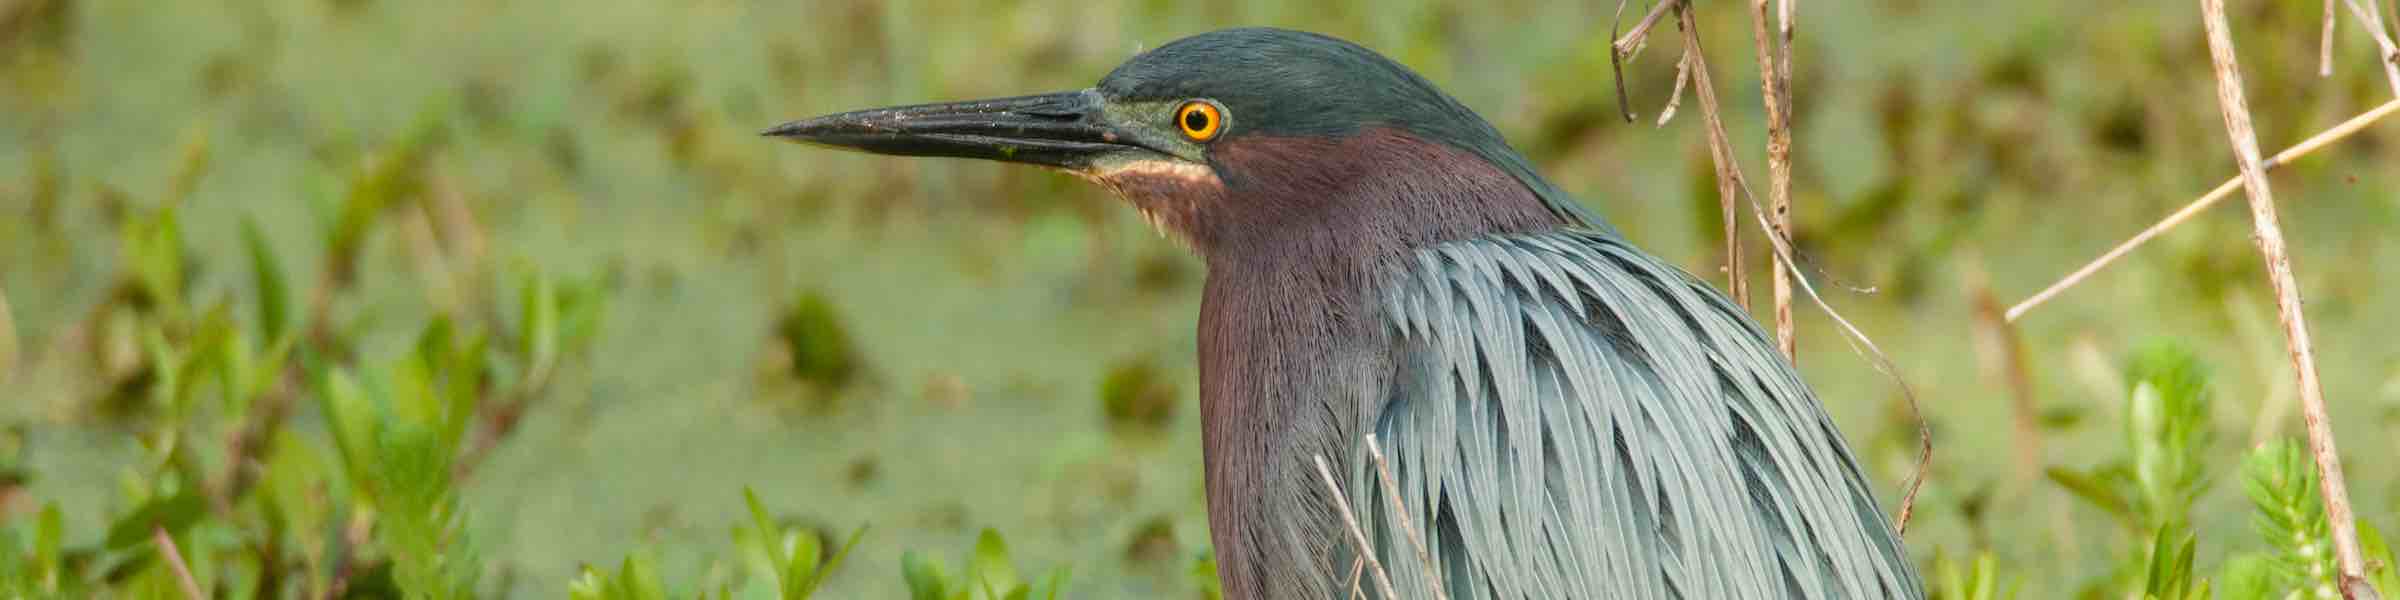 Close up of the head and upper body of a green heron.